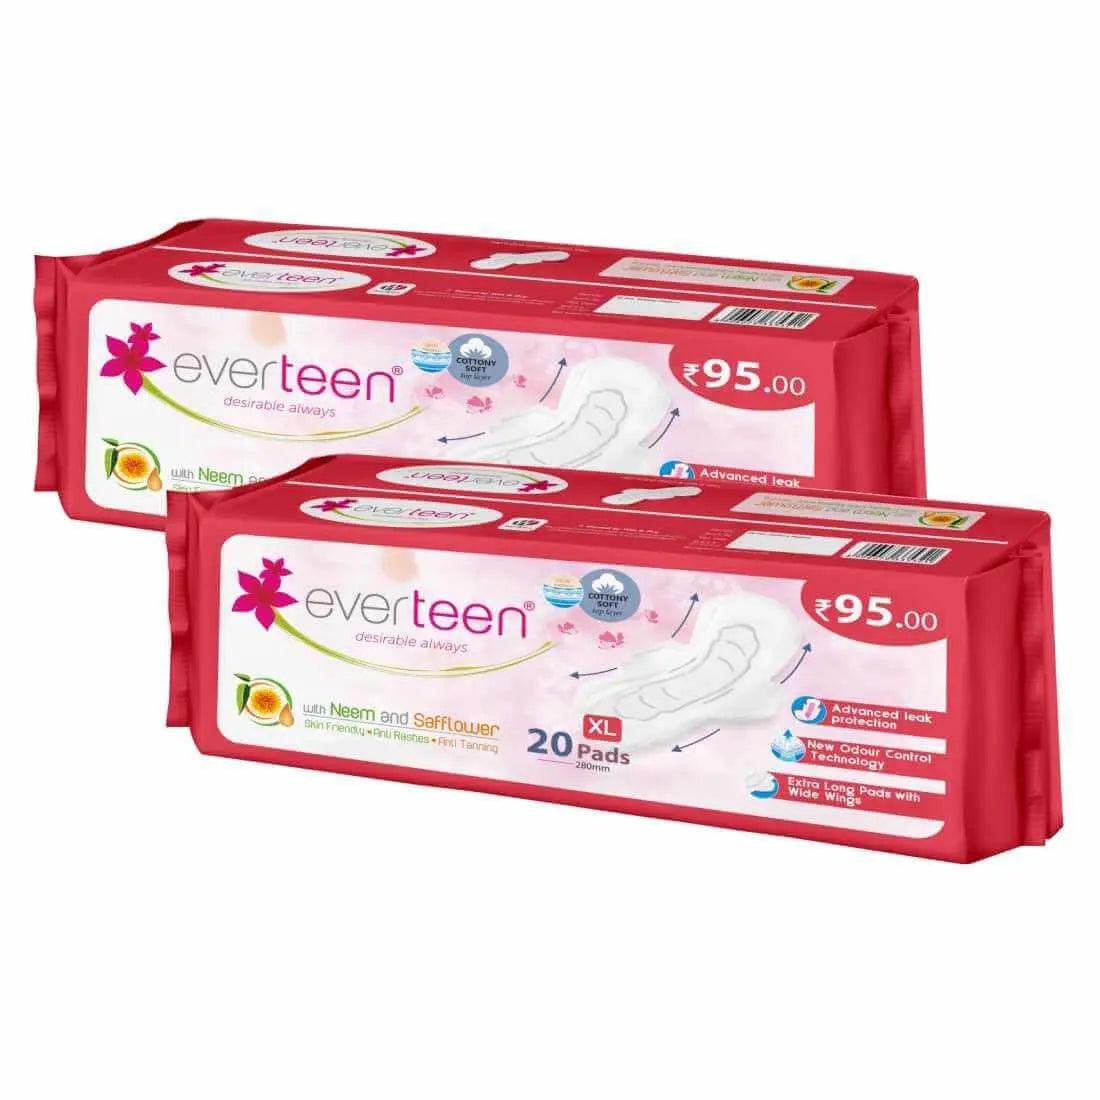 everteen XL Sanitary Napkin Pads with Neem and Safflower for Women - 20 Pads, 280mm 8903540010664